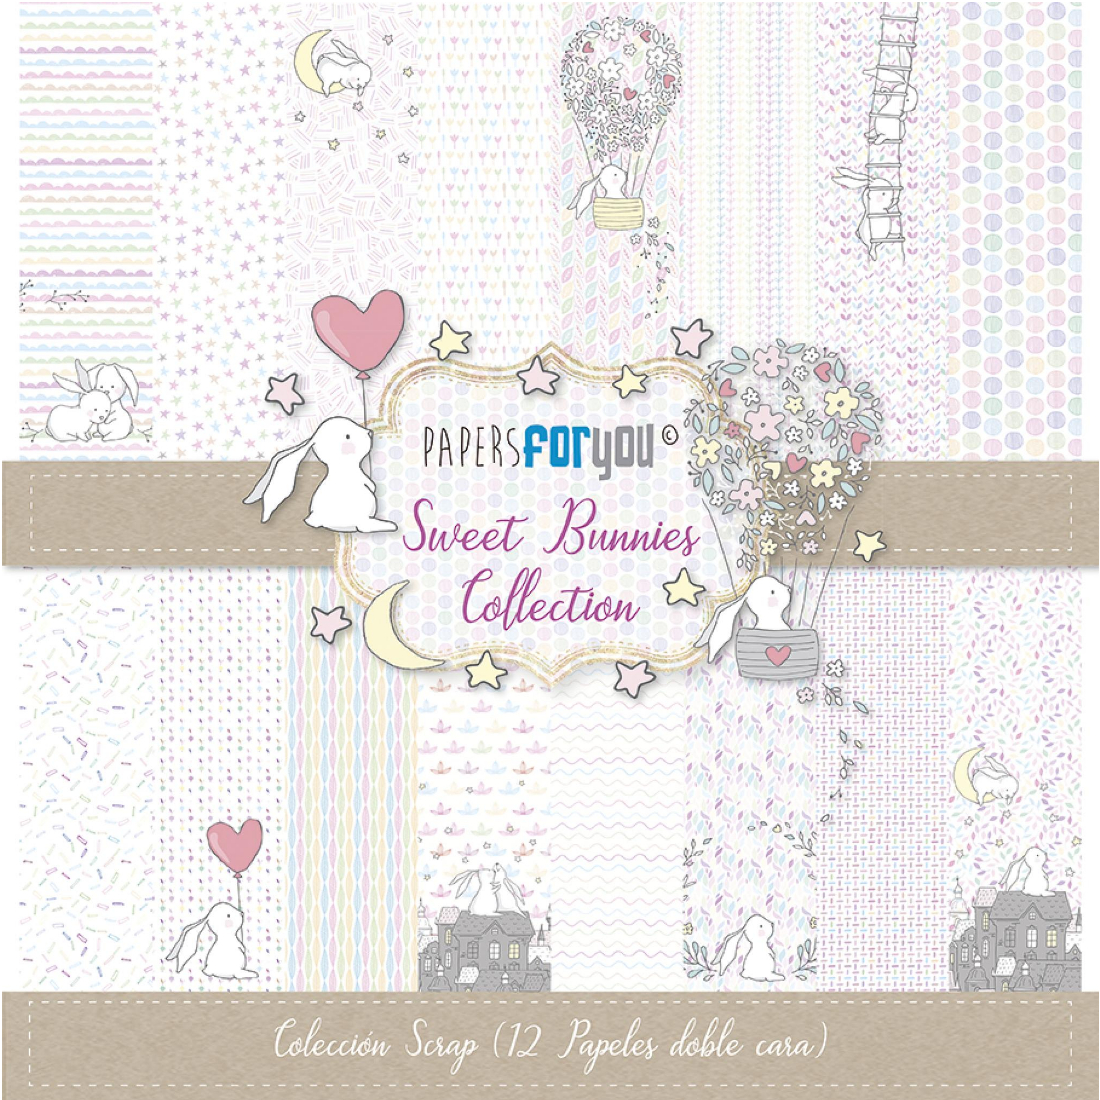 Bloco Papel Scrapbooking Sweet Bunnies PFY-1338 papersforyou